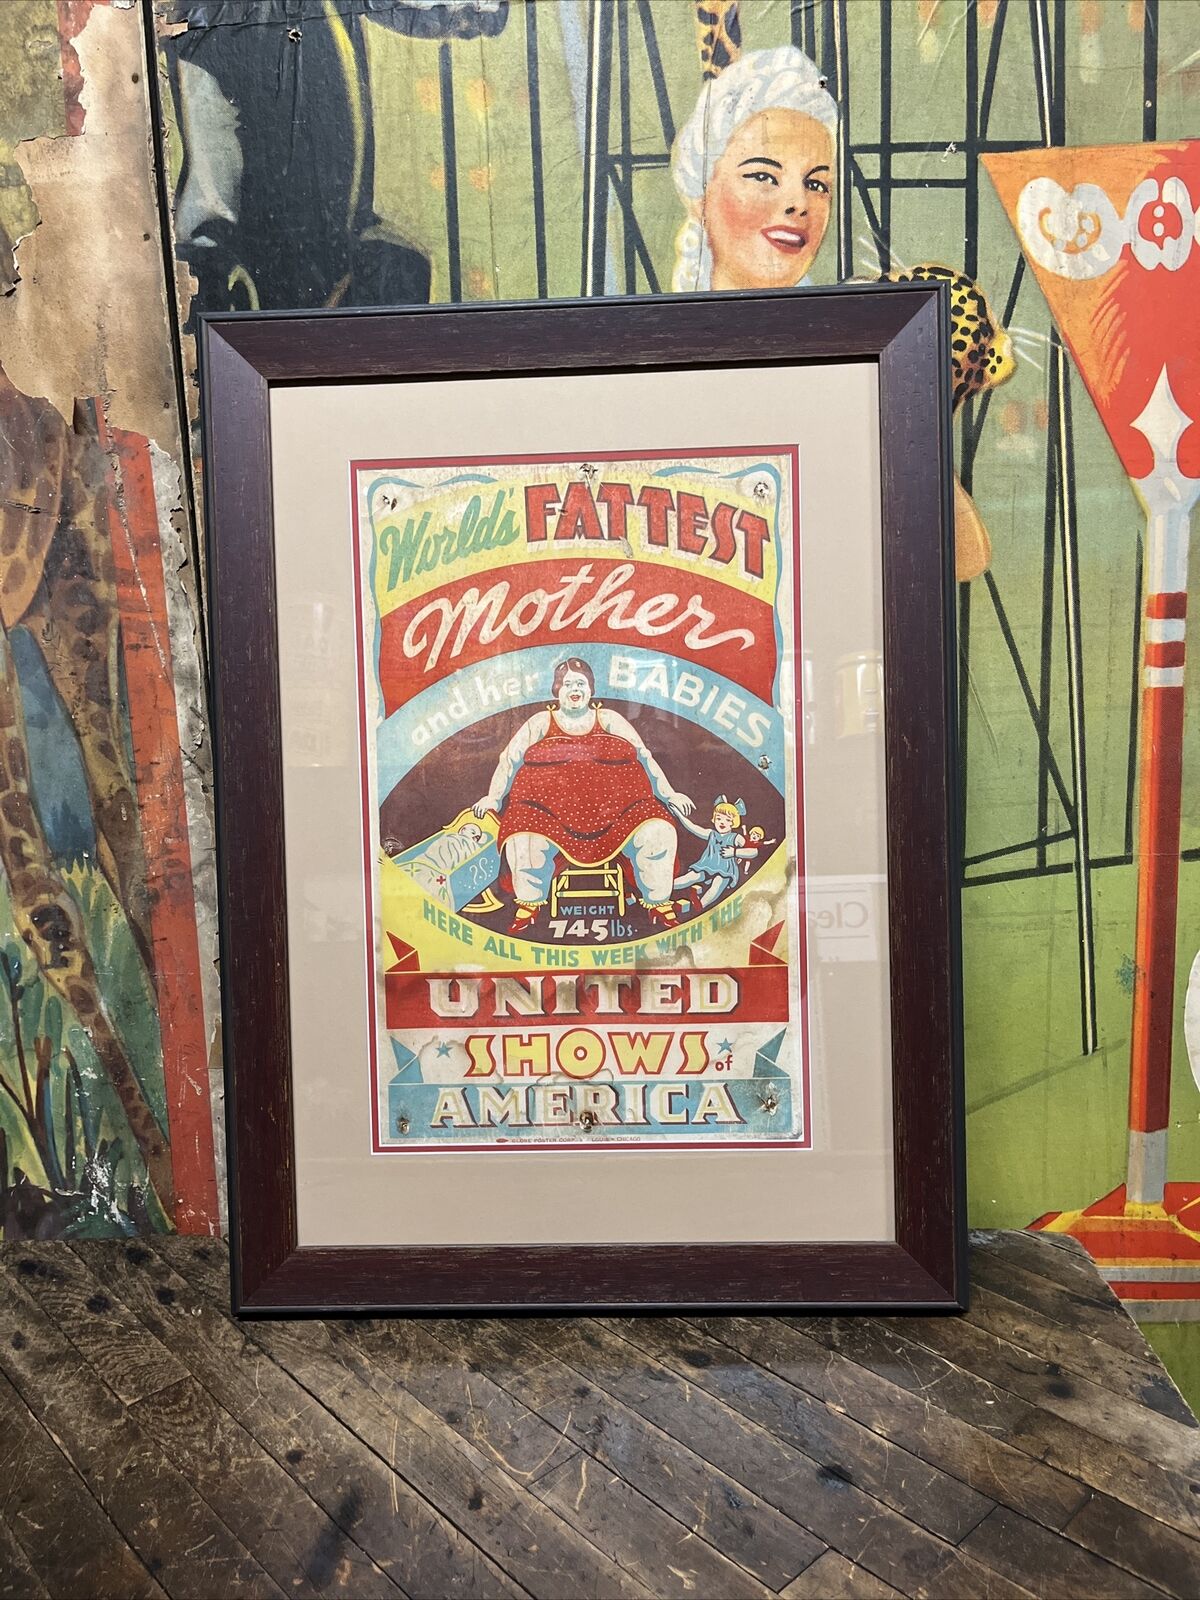 VINTAGE WORLDS FATTEST MOTHER CIRCUS POSTER SIGN CARNIVAL SIDESHOW FREAK SHOW